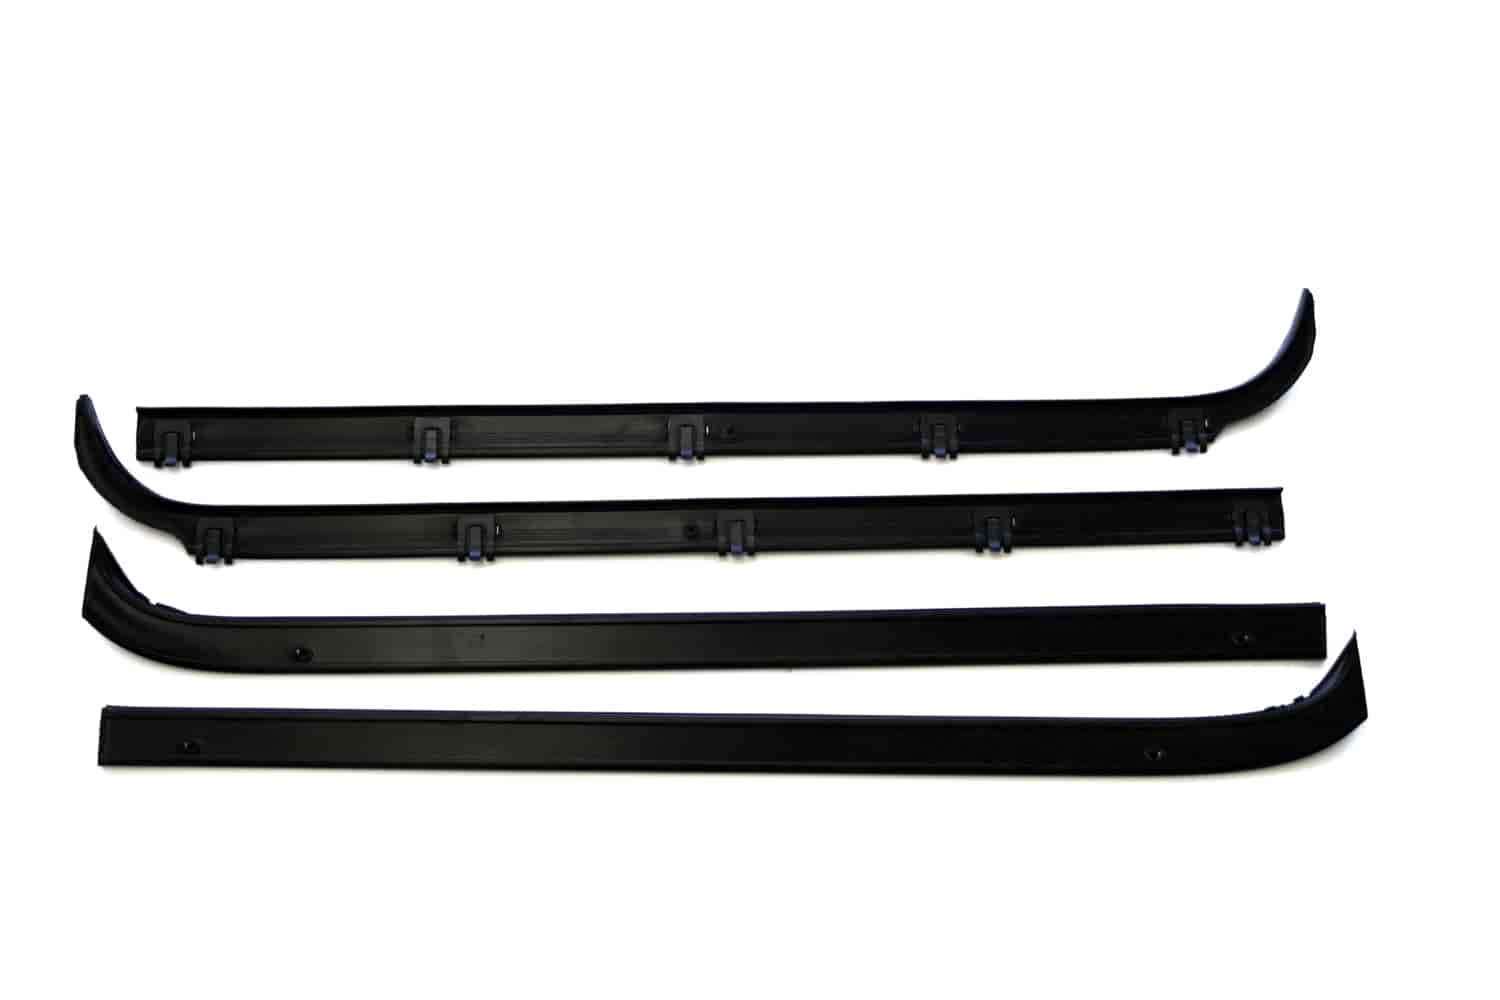 1986 Ford Bronco Window sweeper kit. Fits 80-87 Ford Bronco and Truck 2 Door Extended/Standard-WC 6600-12